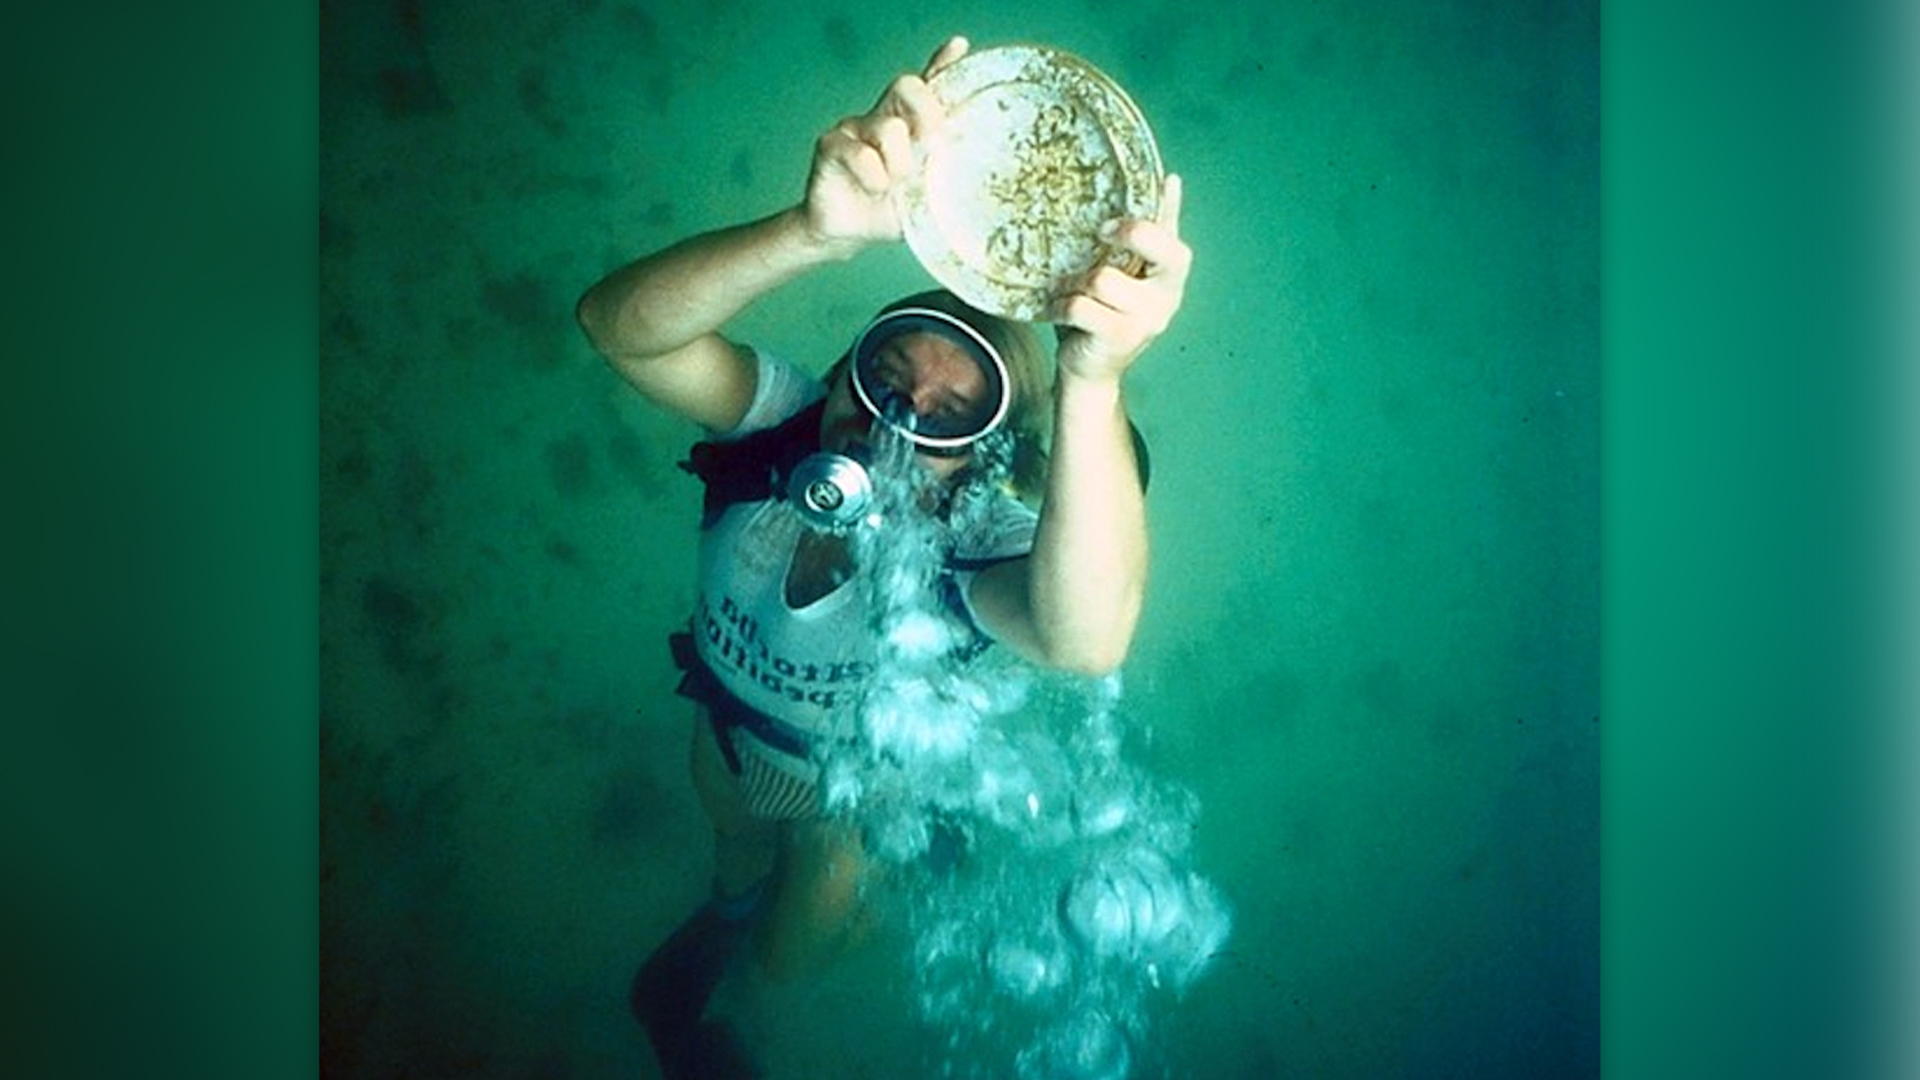 We see a diver holding a metal plate and swimming upward, with bubble coming out of their mouth.